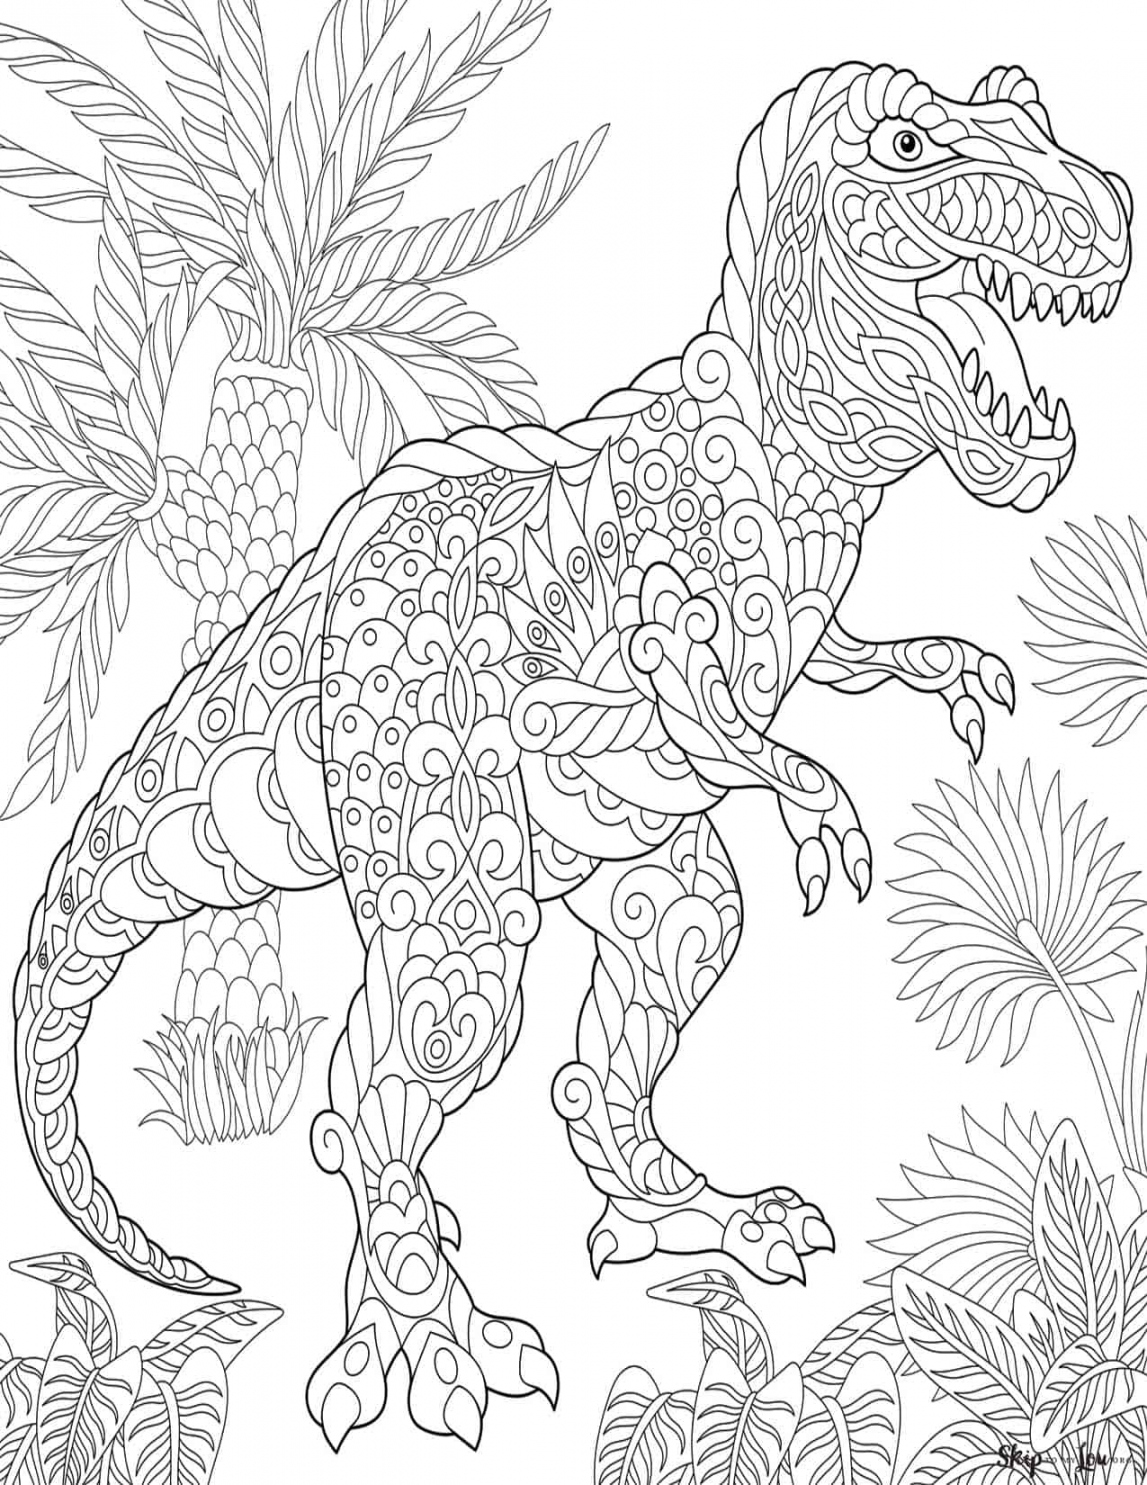 Dinosaur Coloring Pages Free Printable - Printable - Dinosaur Coloring Pages Free Printables  Skip To My Lou